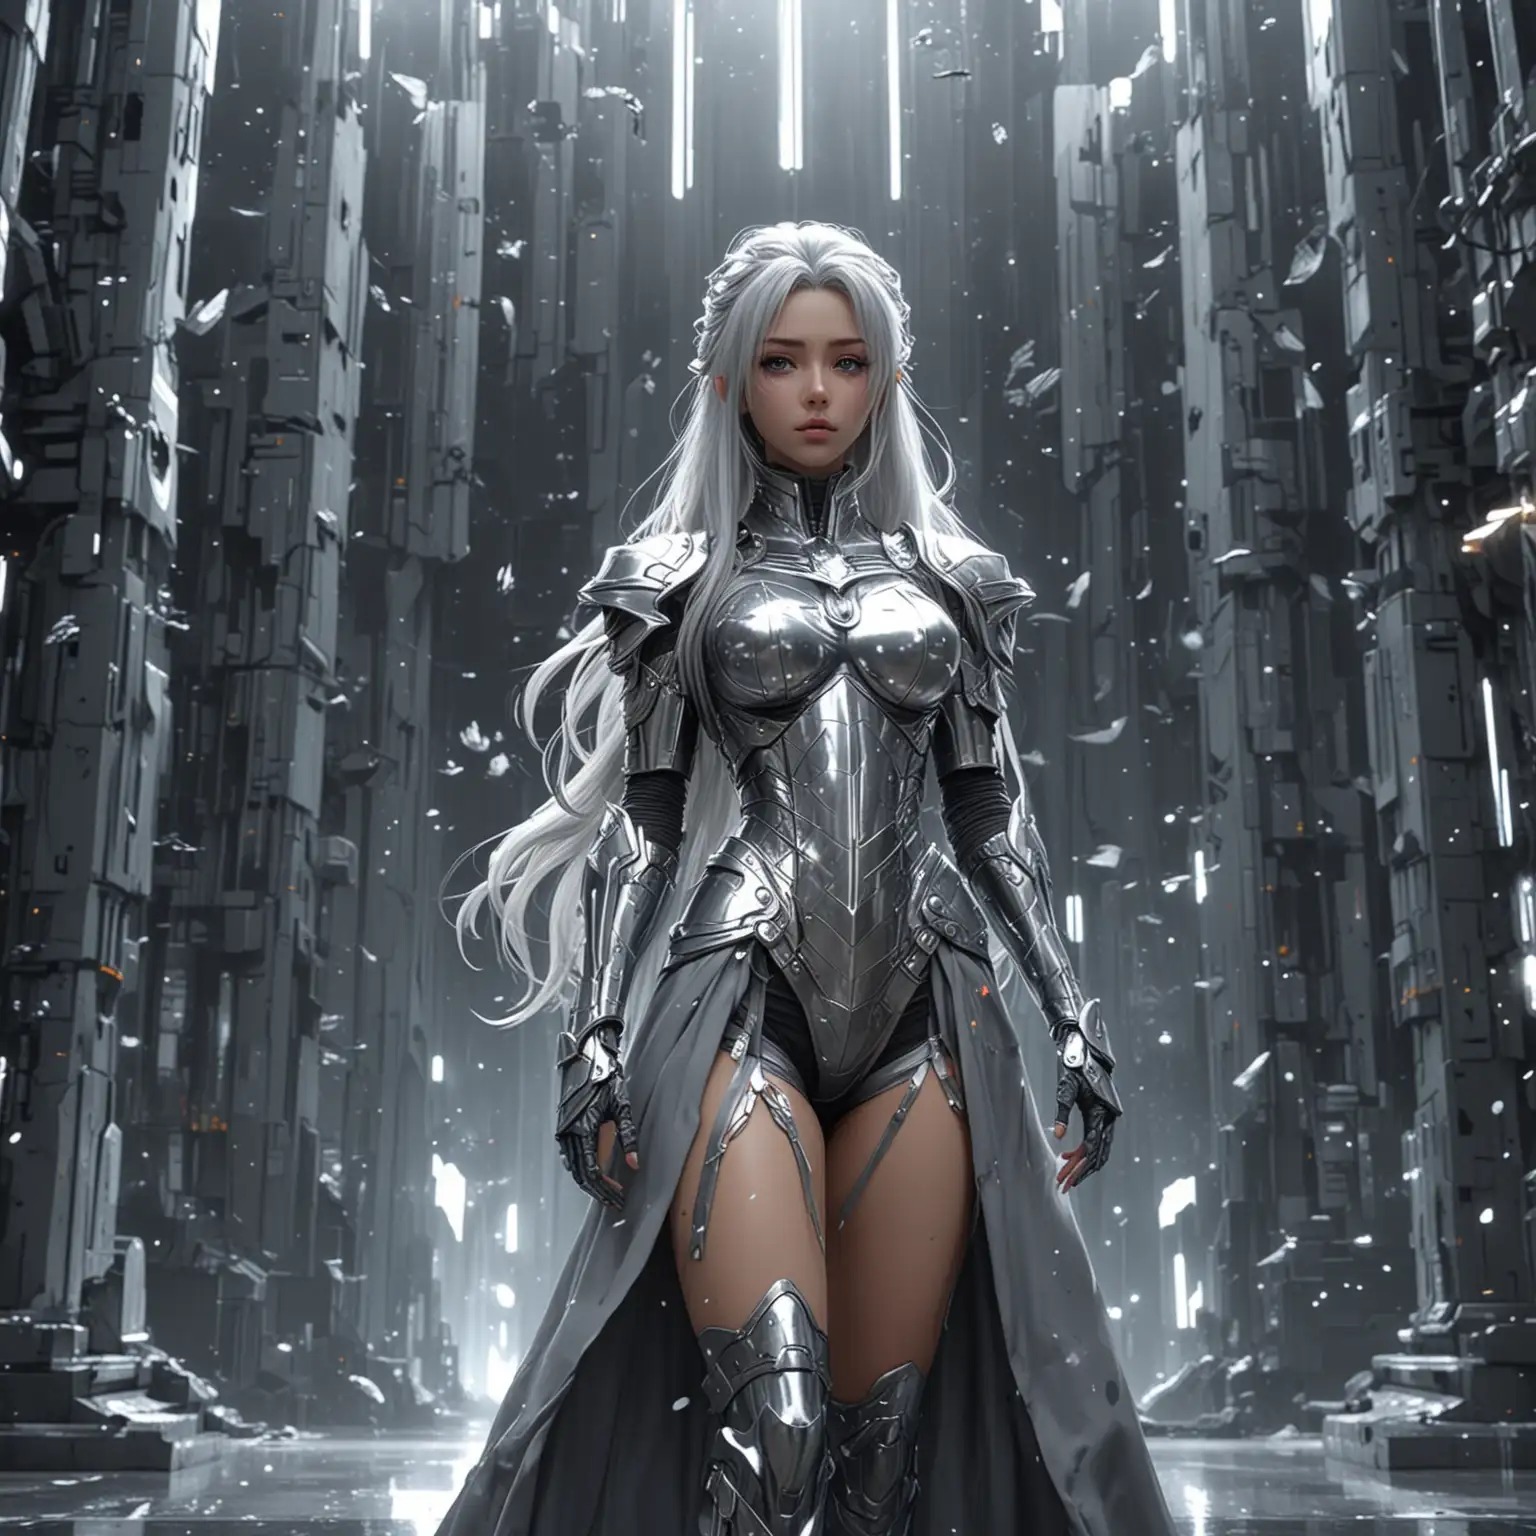 8k vacant outer space, wearing silver-gray armor anime haughty queen standing before the throne looking at all the filled with science fiction style cold buildings, long hair, swaying with the wind, anime girl wearing a silver-gray dress, anime style. 8K, 